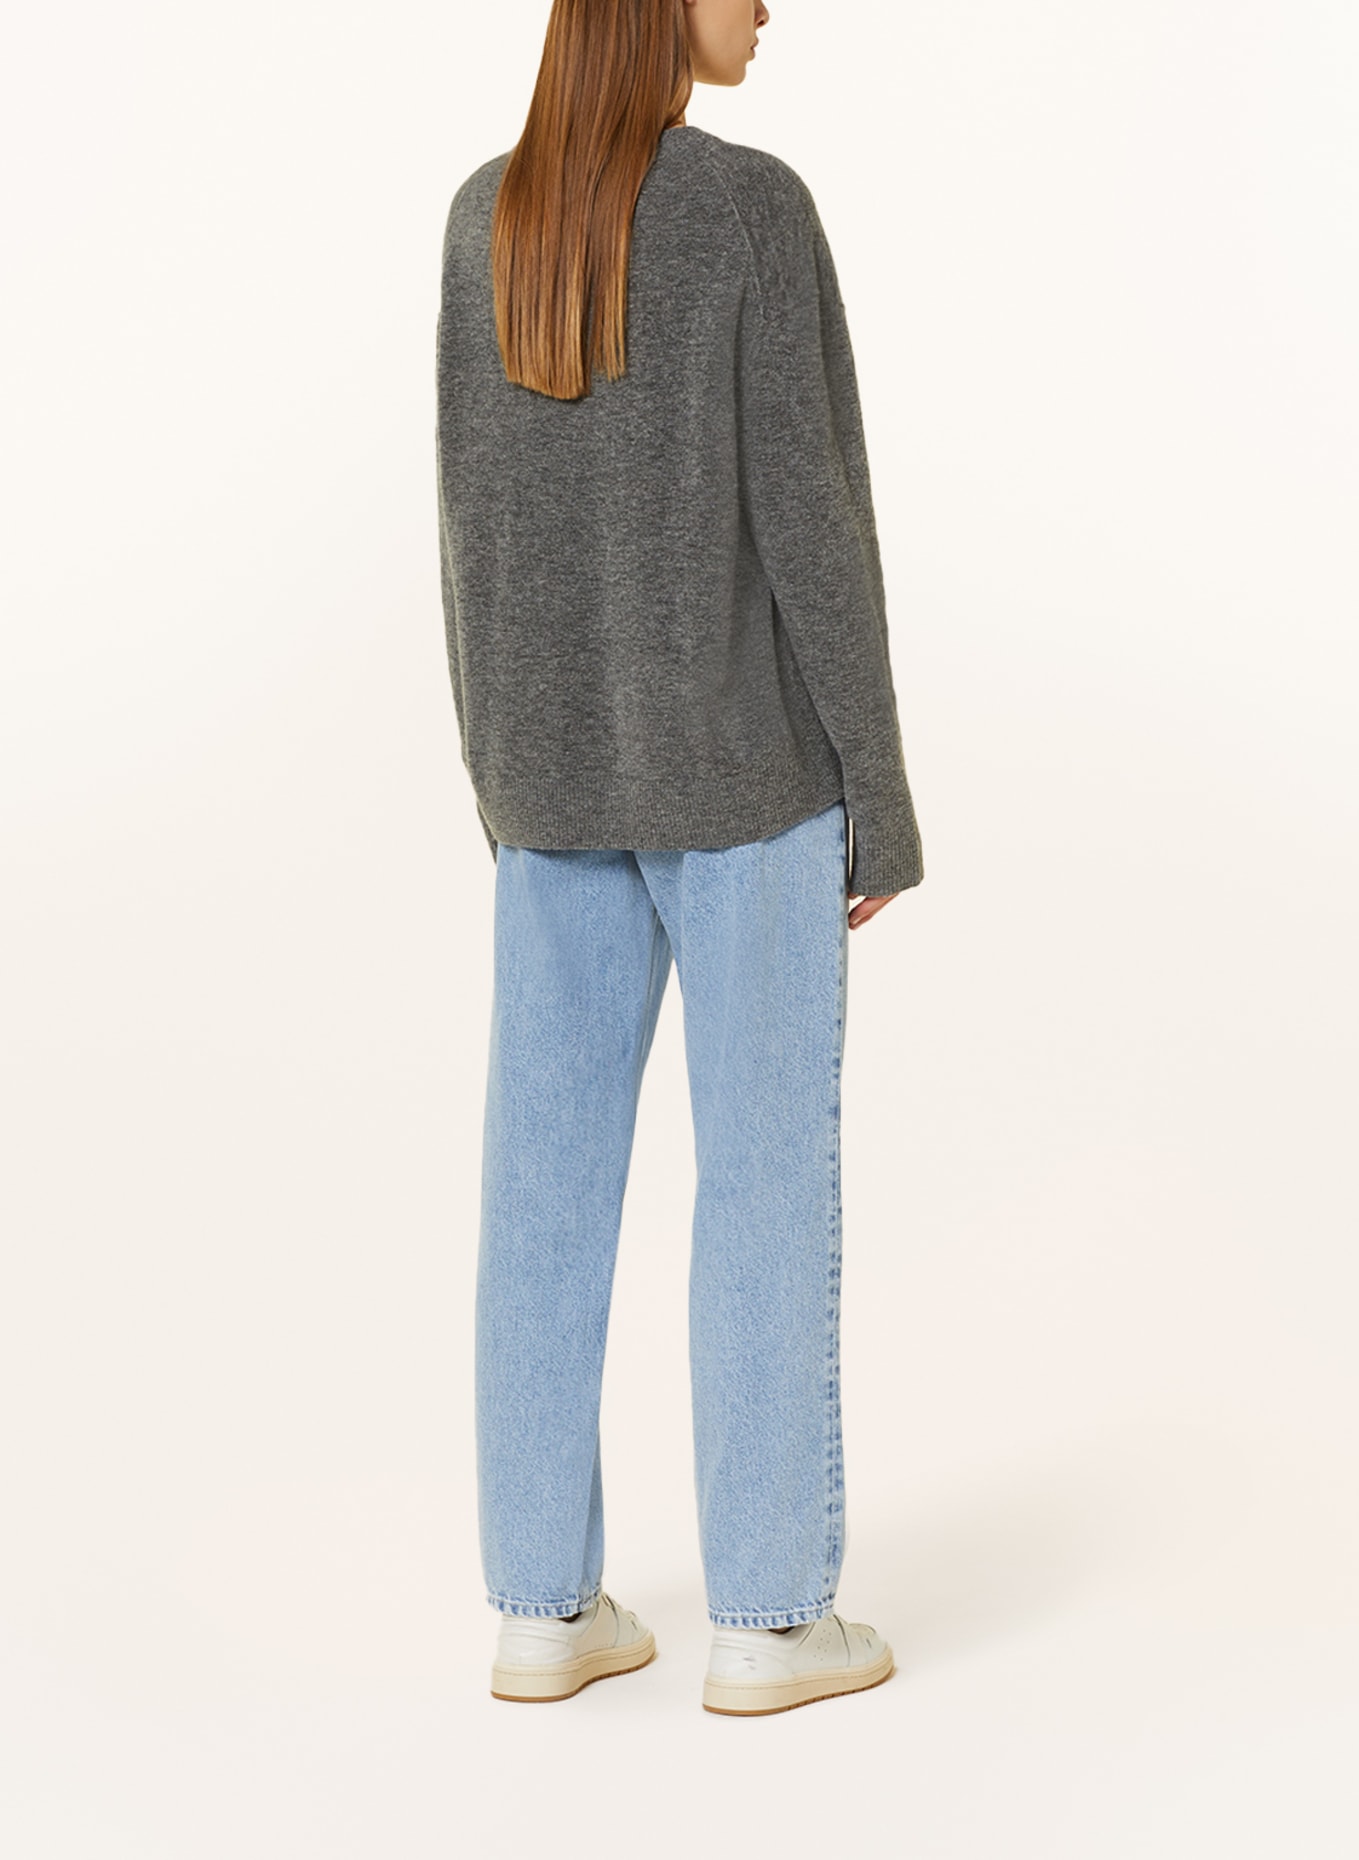 Marc O'Polo DENIM Oversized sweater, Color: GRAY (Image 3)